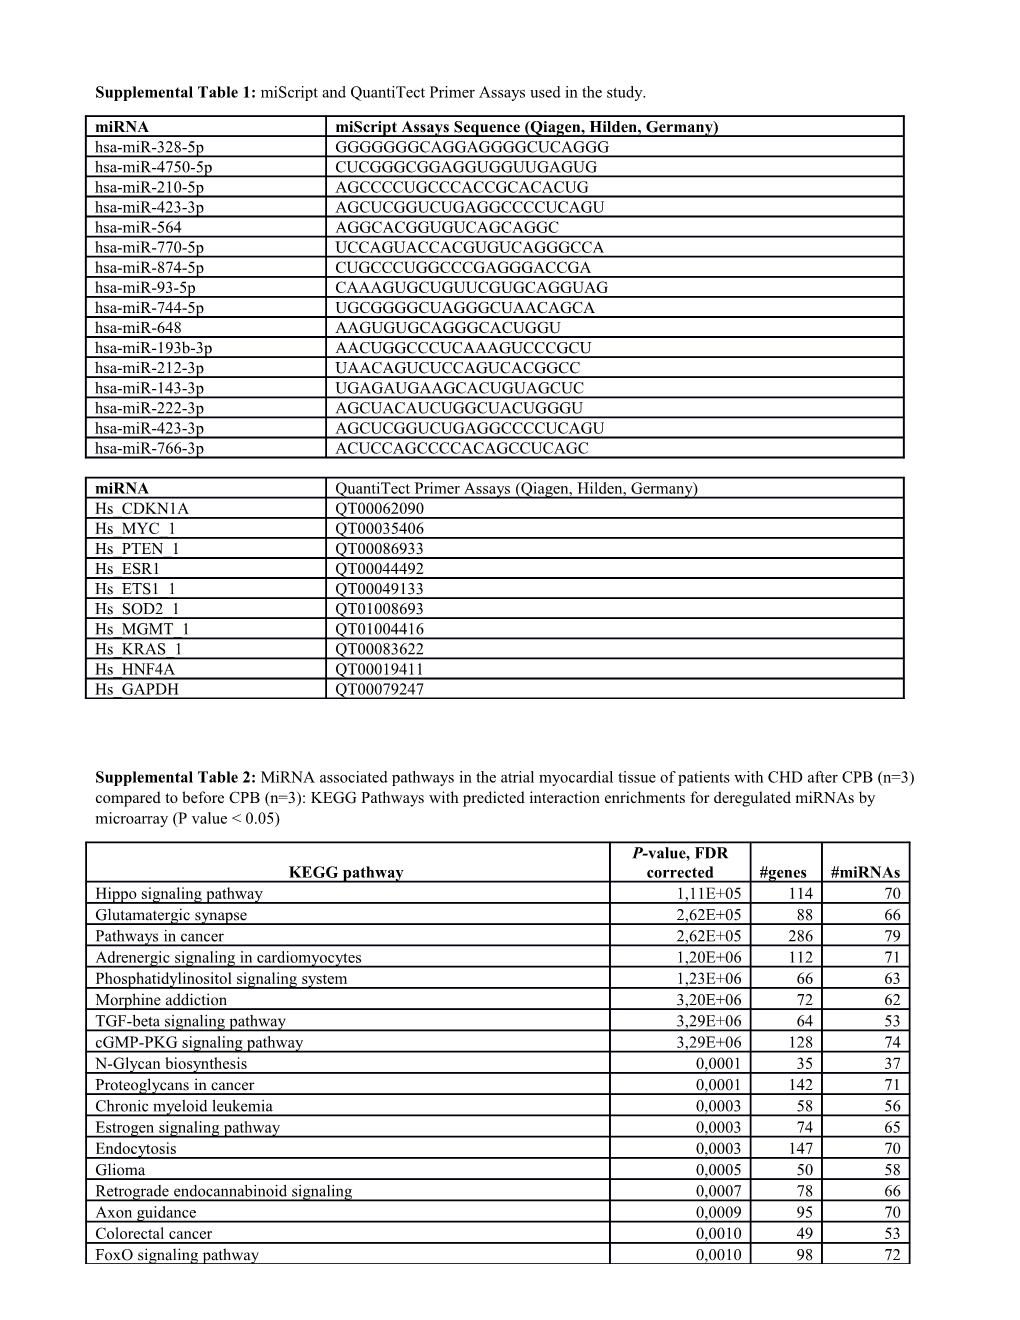 Supplemental Table 1: Miscript and Quantitect Primer Assays Used in the Study